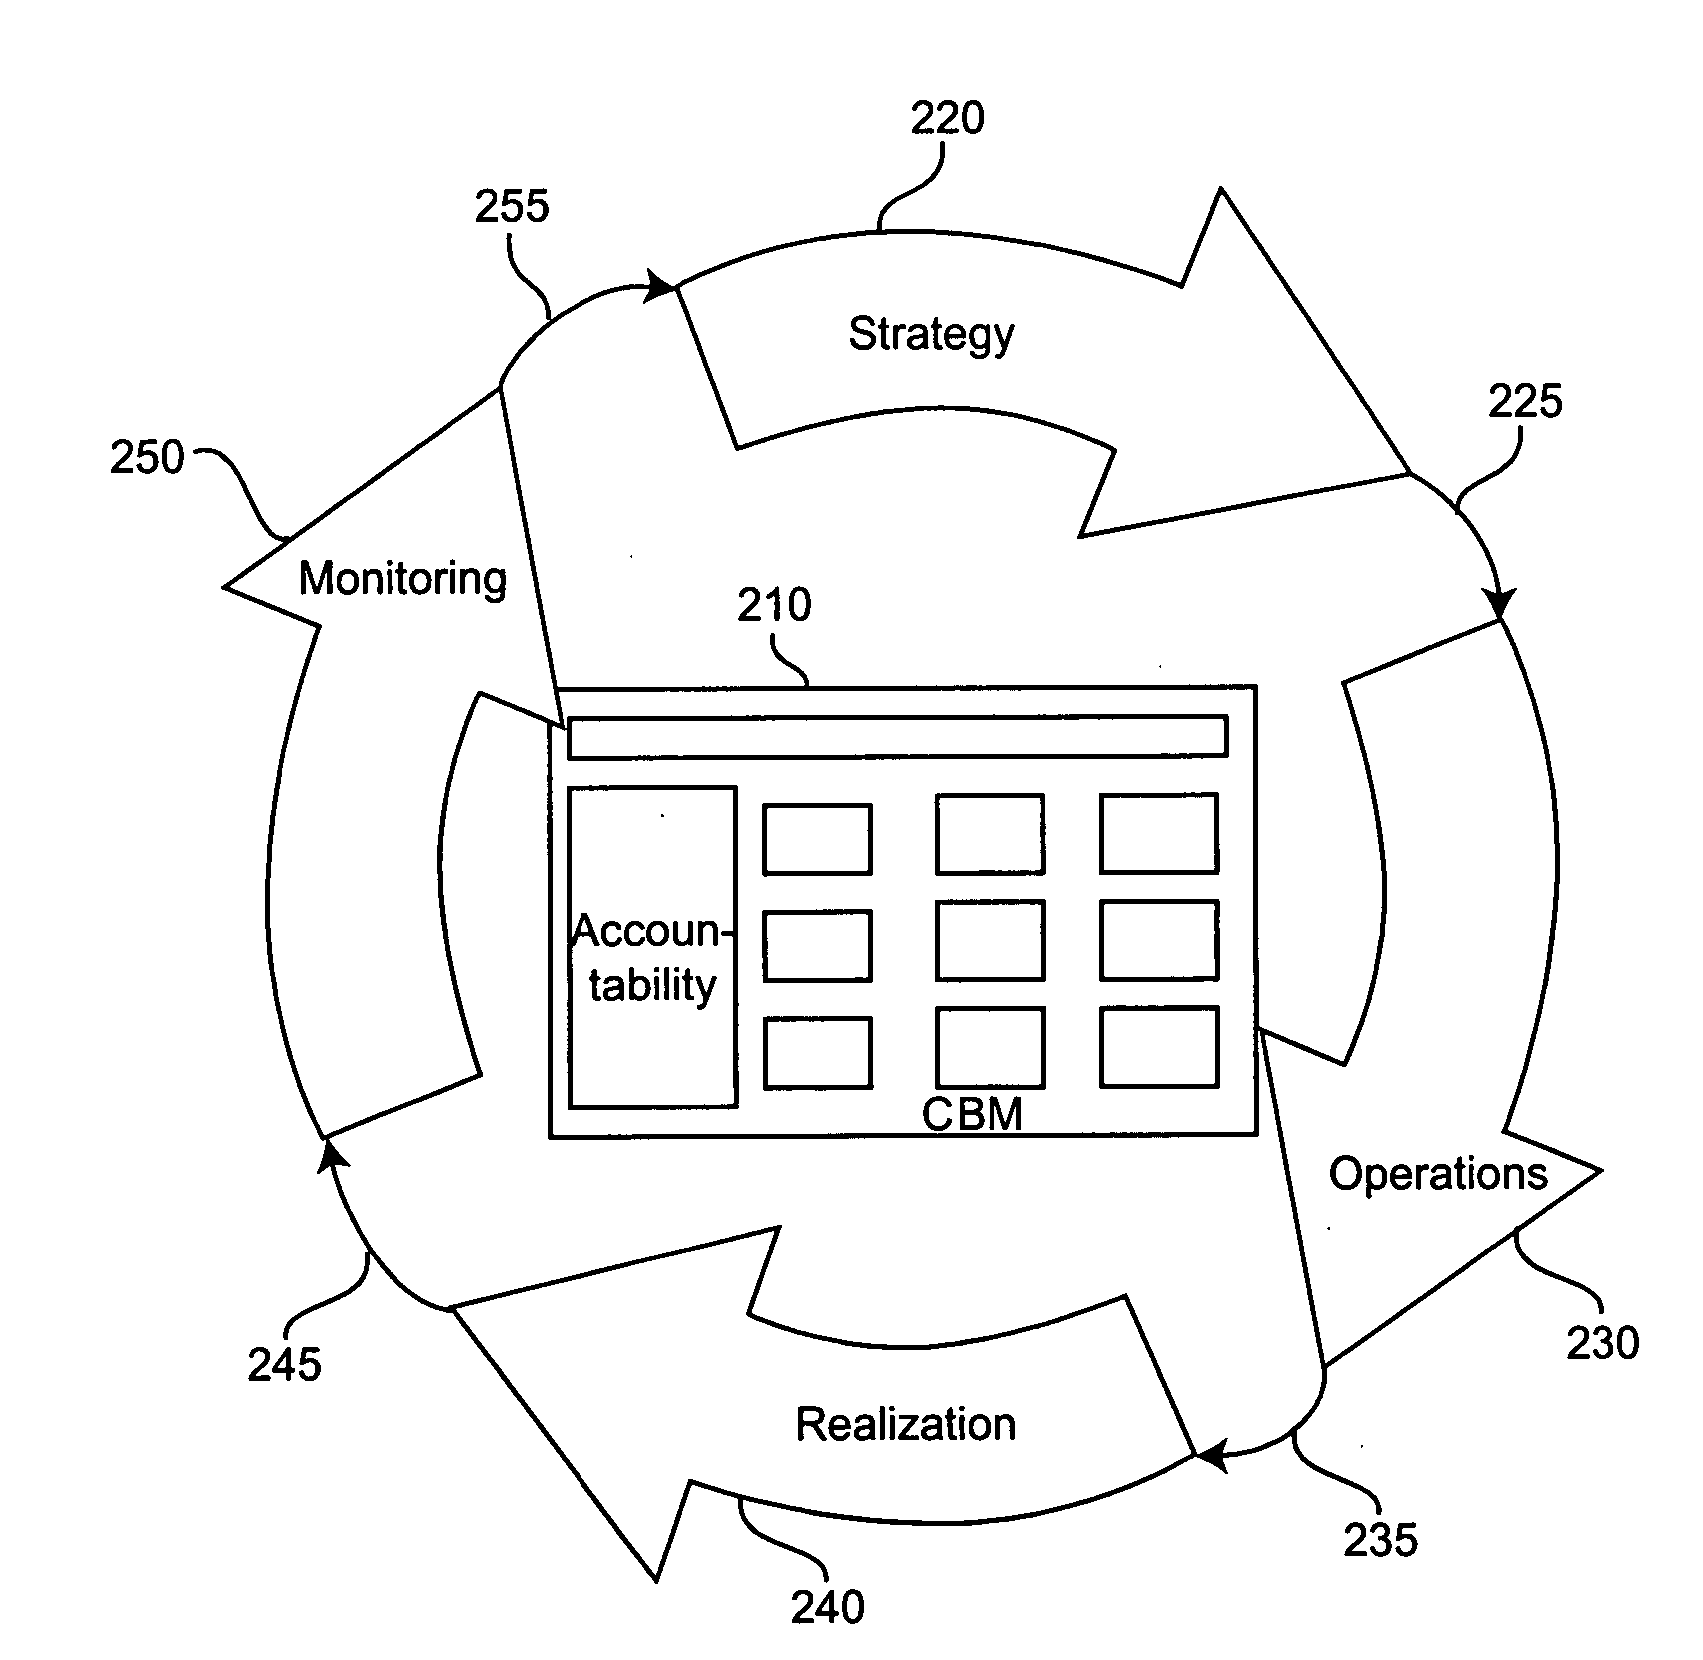 Method and system for enterprise monitoring based on a component business model